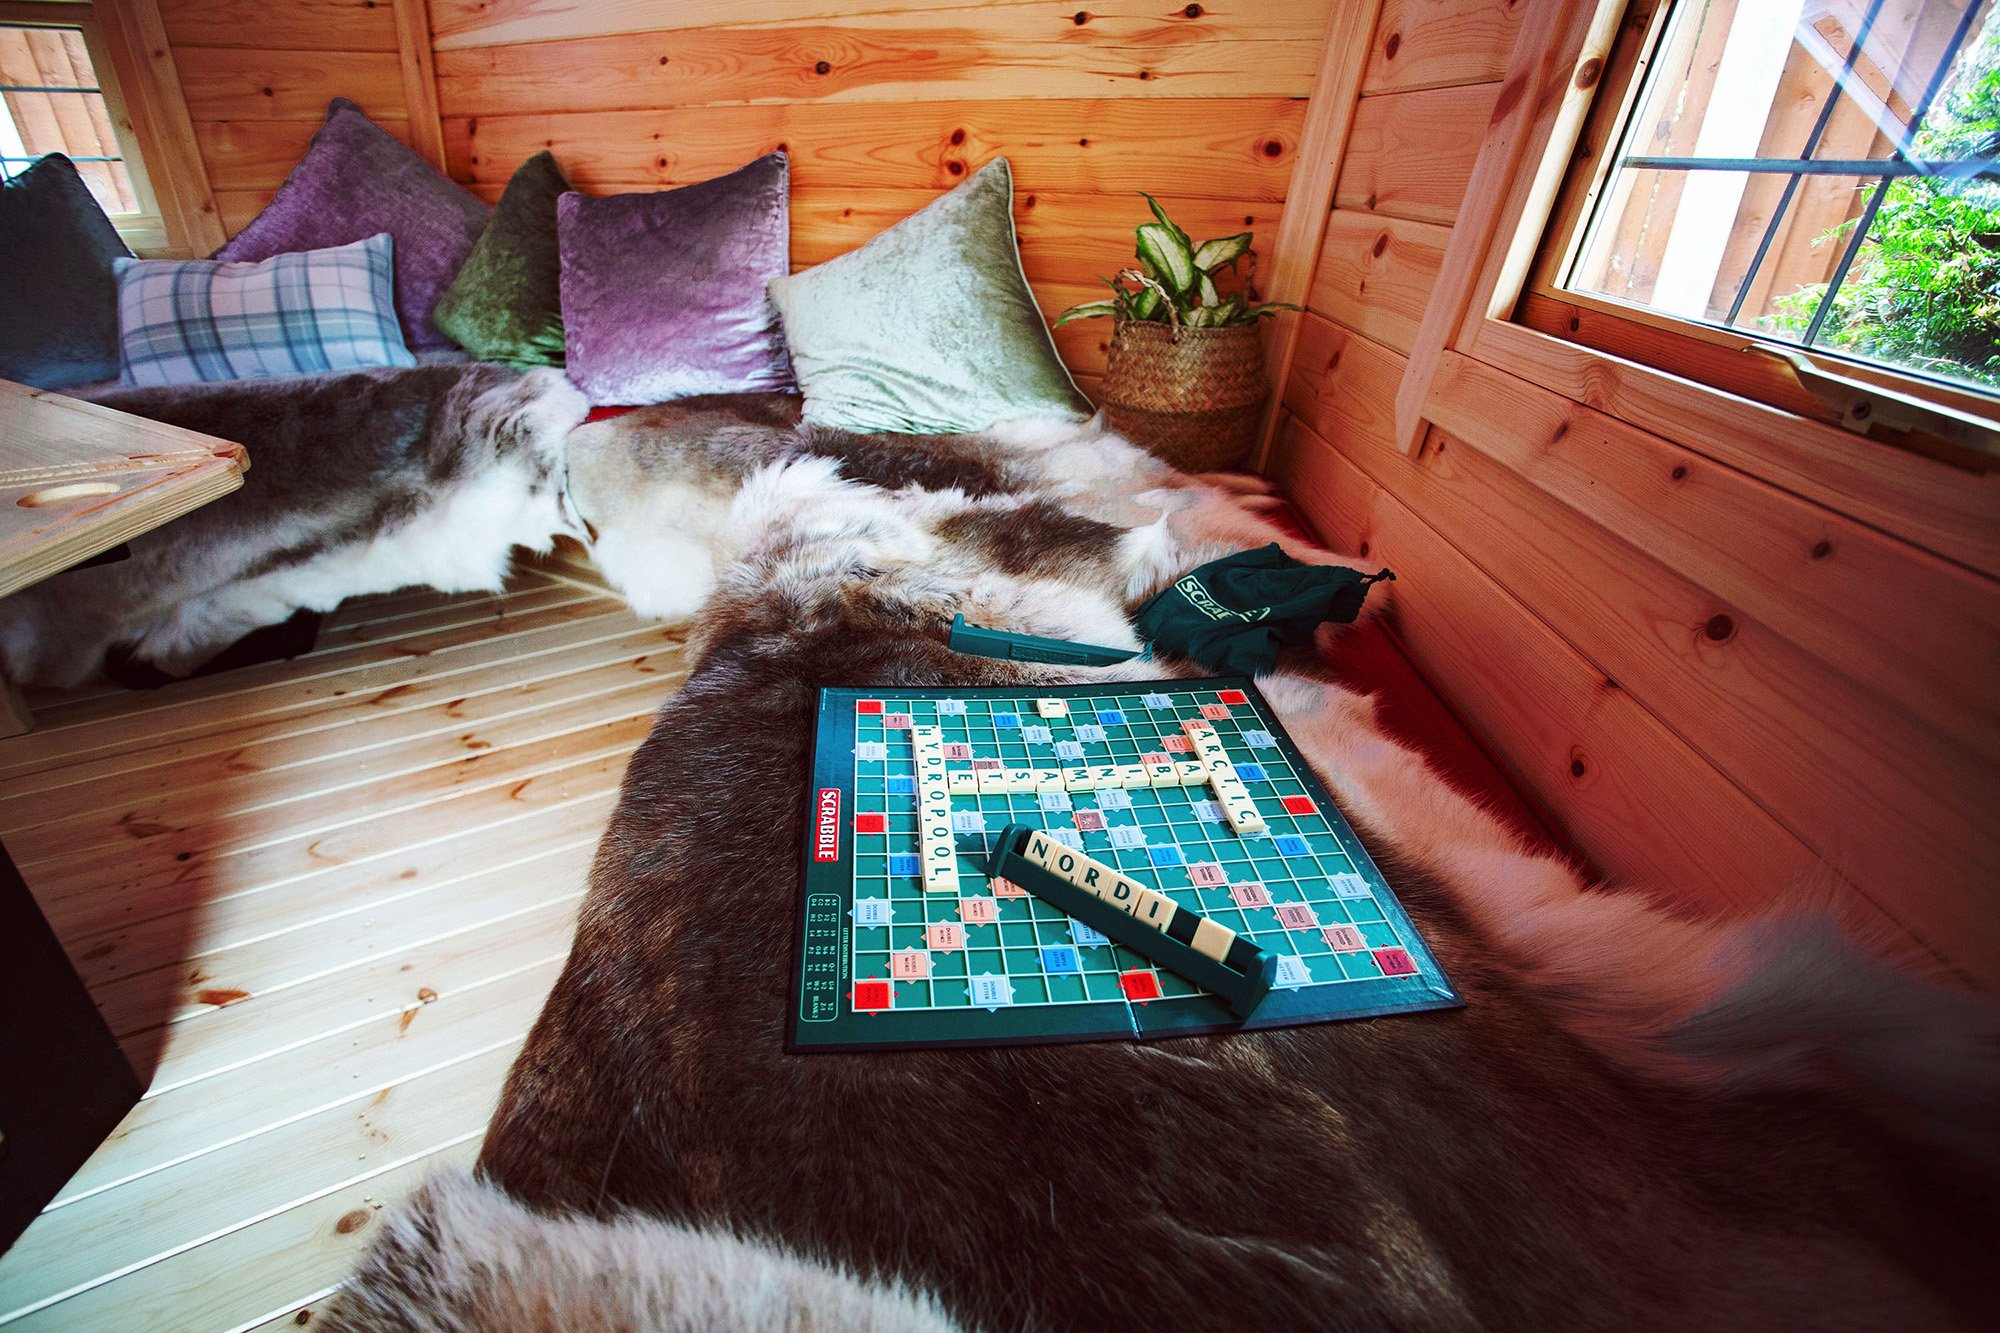 Inside Arctic Cabins BBQ Hut with Scrabble board